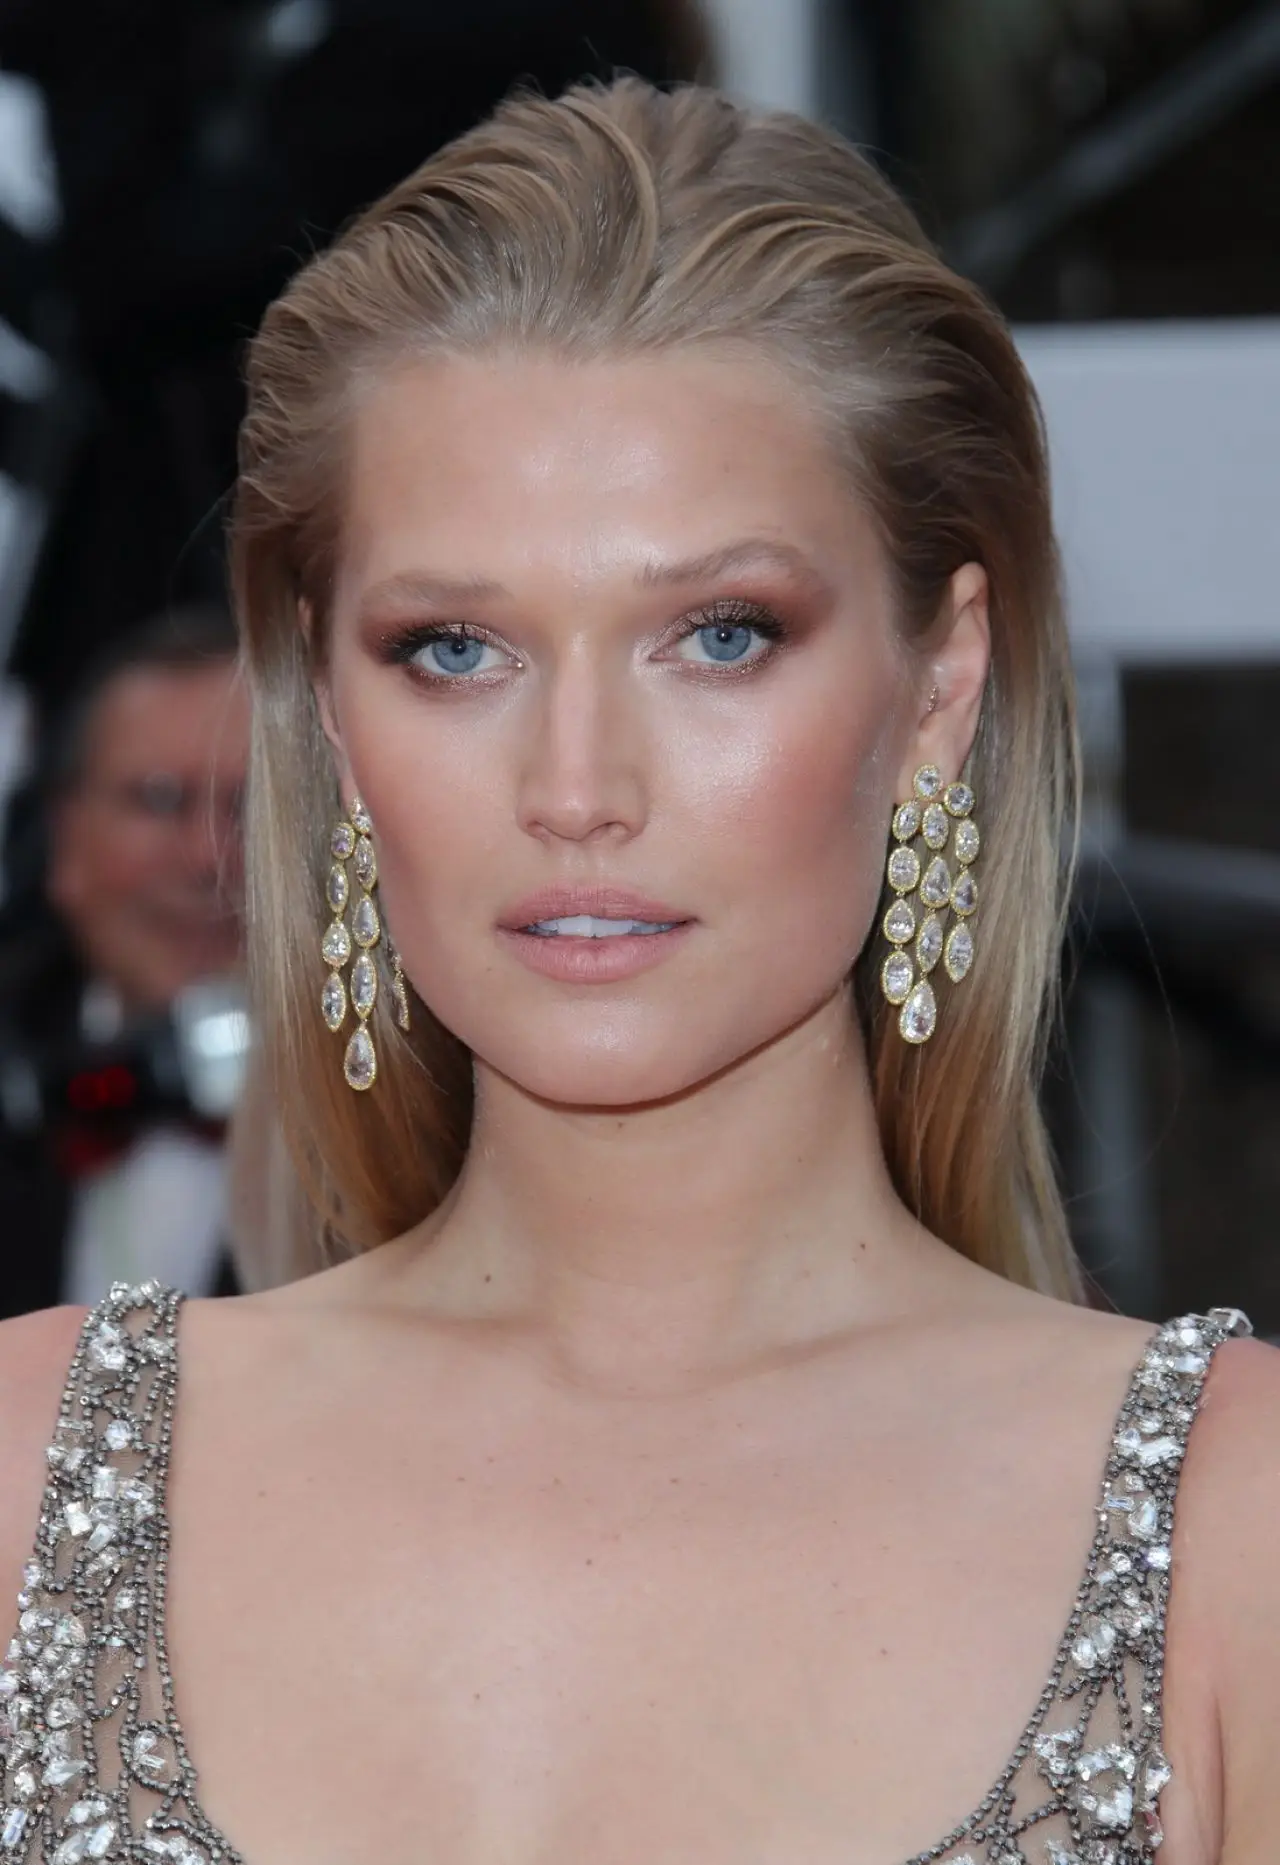 TONI GARRN STILLS AT SOLO A STAR WARS STORY RED CARPET IN CANNES11